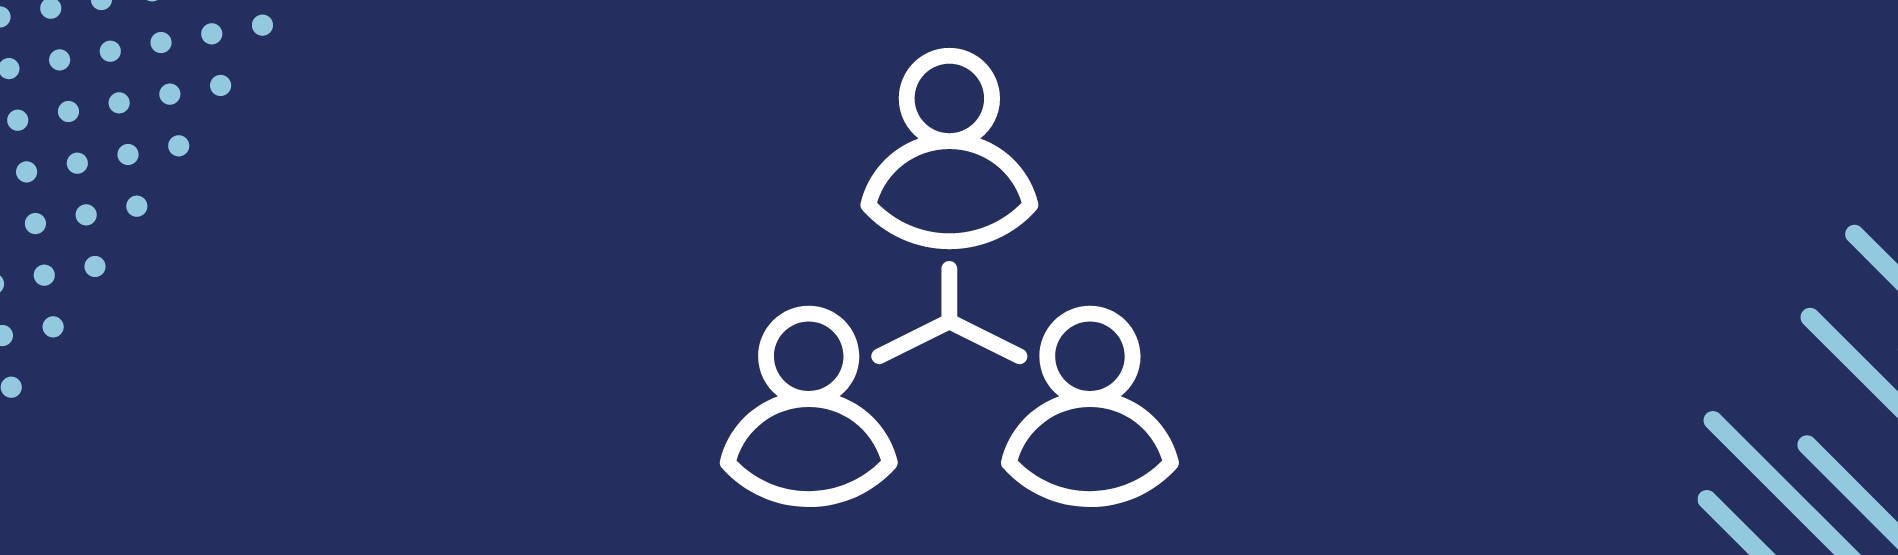 Icon of the 3 people connected or linked together